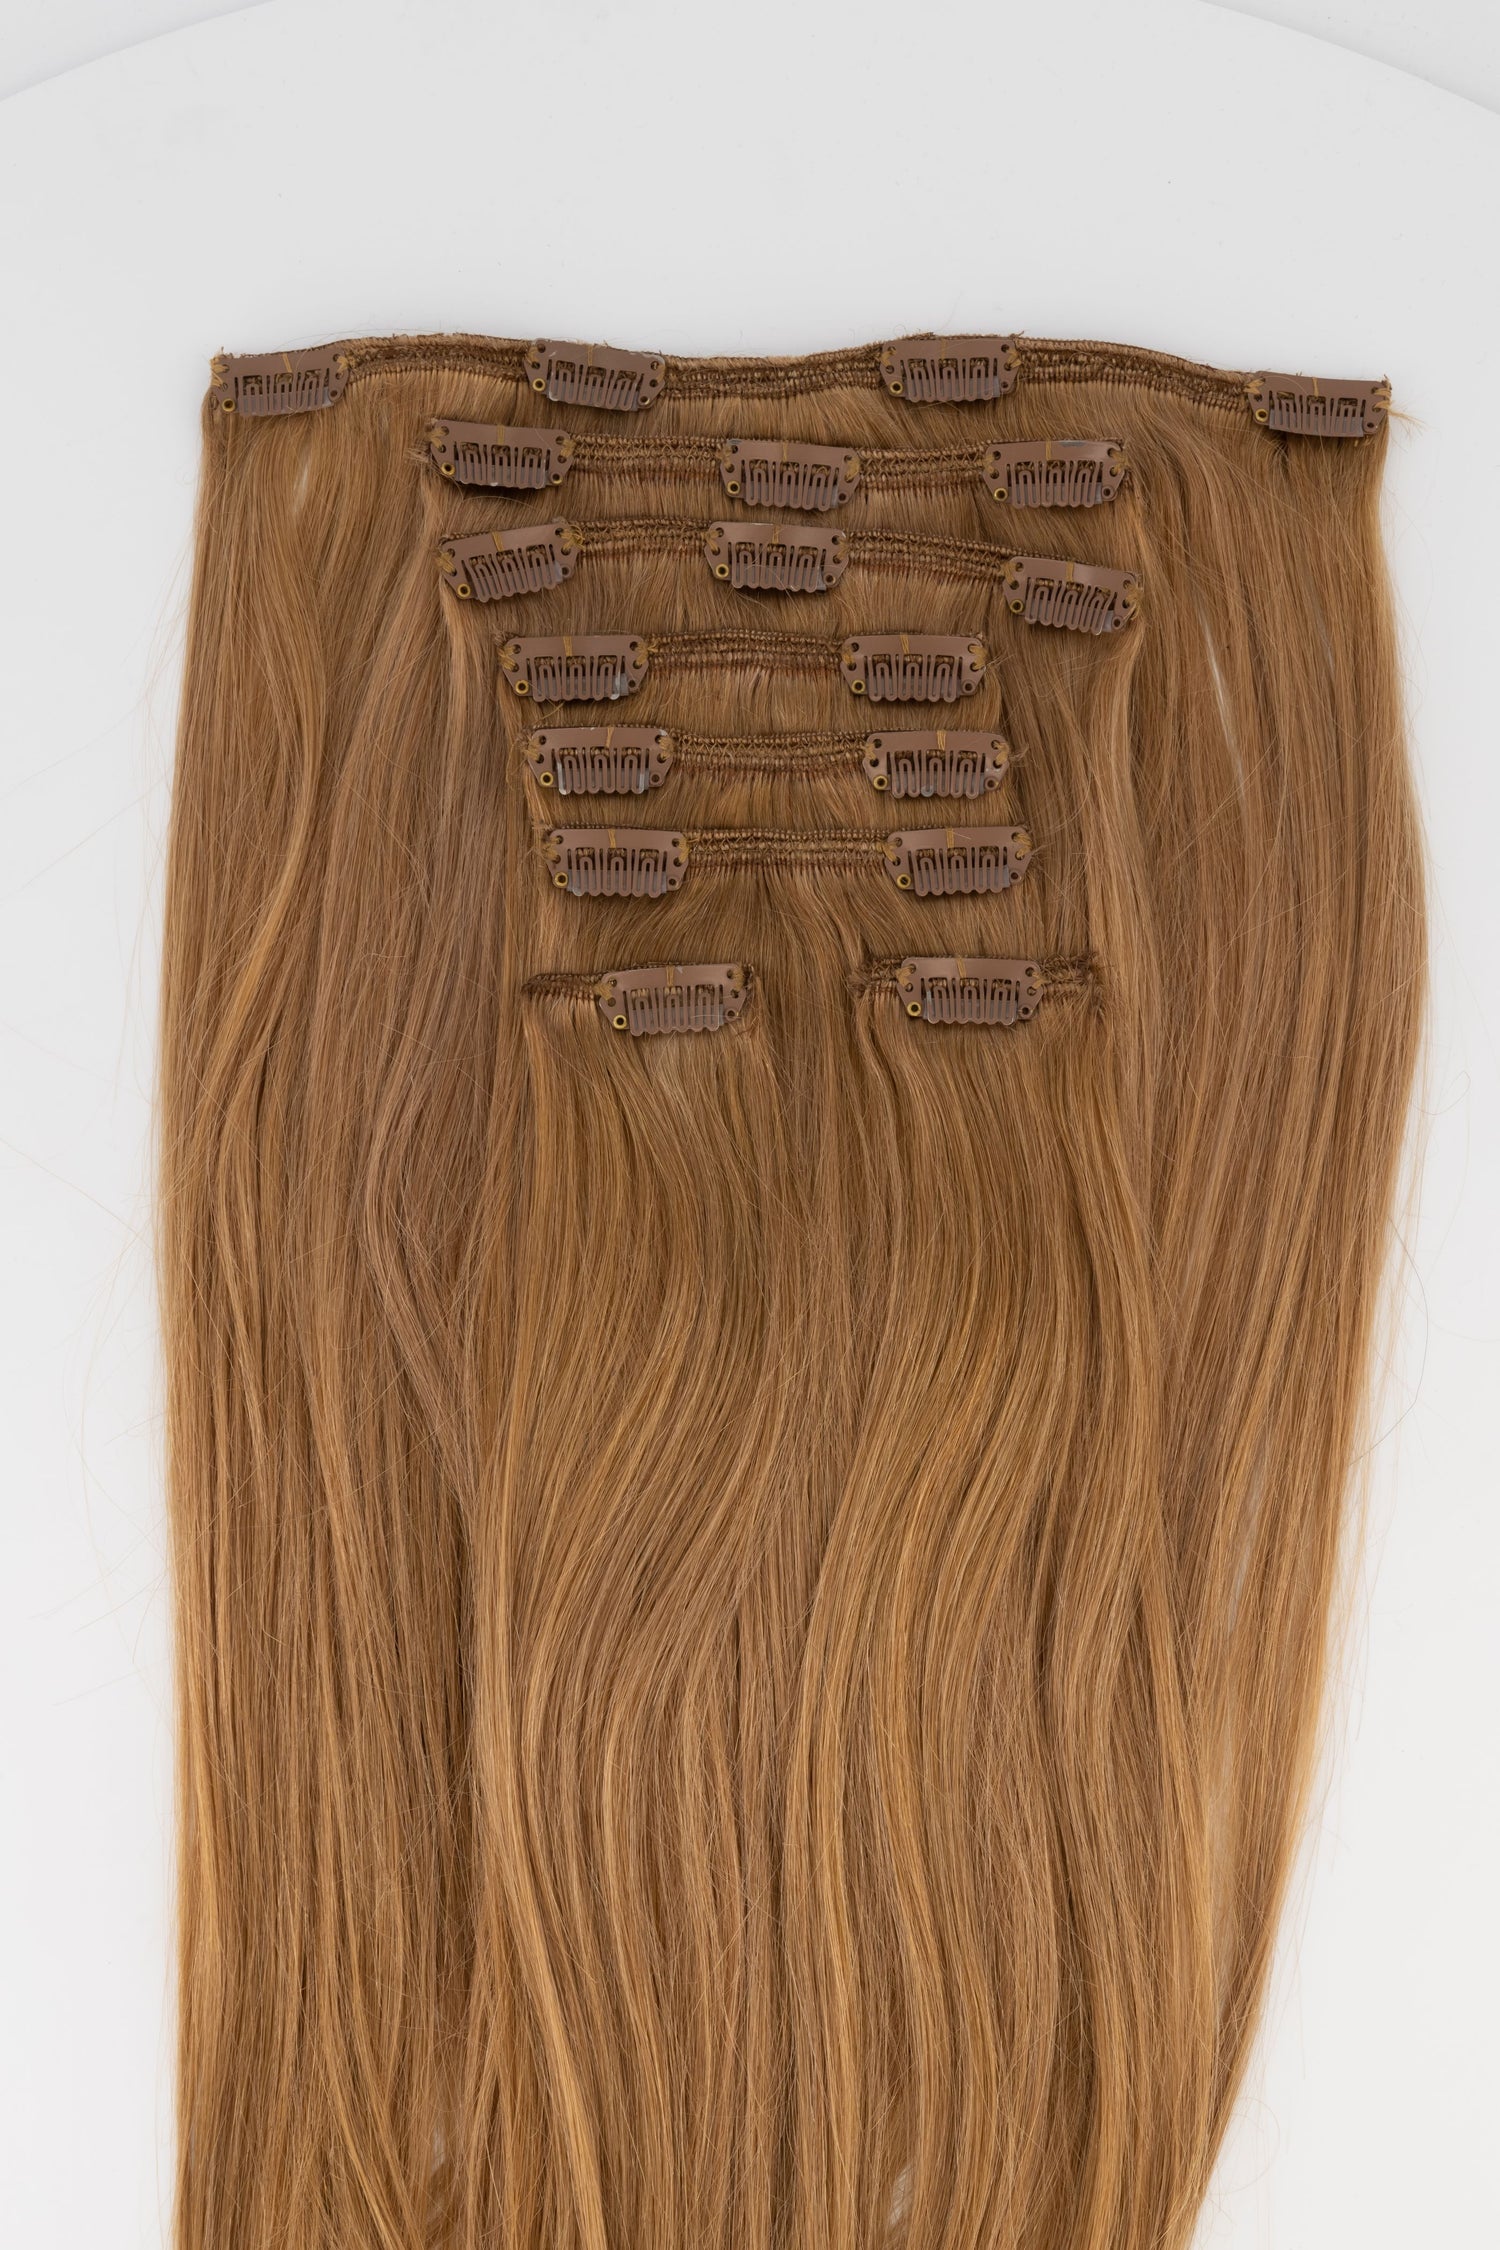 Frontrow clip-in hair extensions in toffee blonde